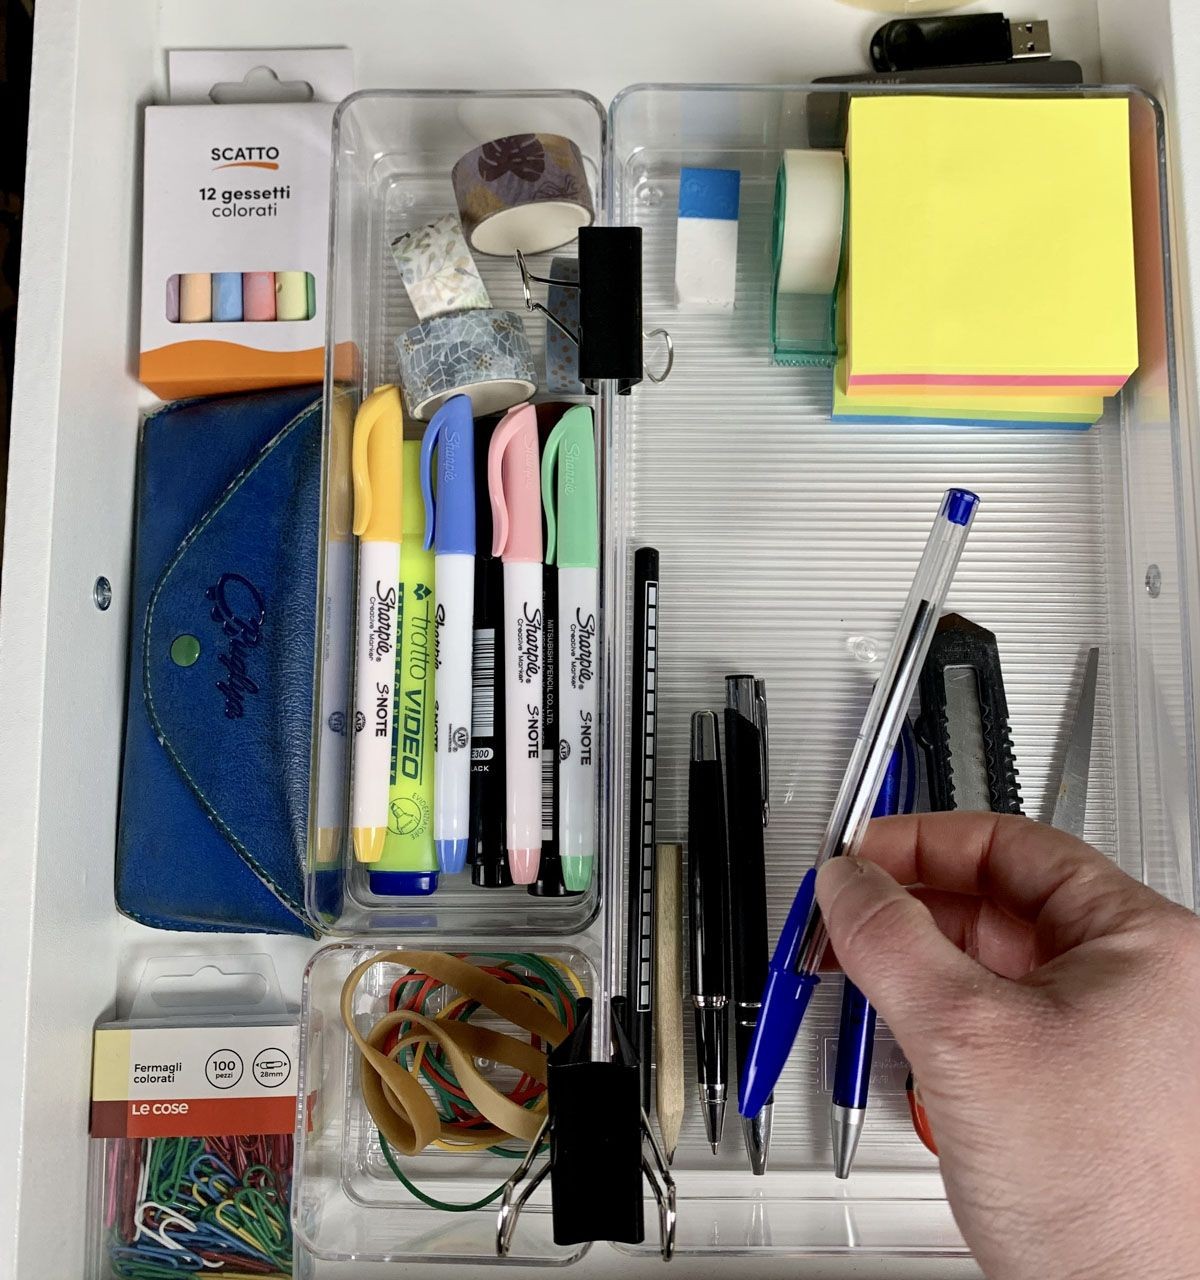 Keep the Drawer Tidy with Organizer Trays